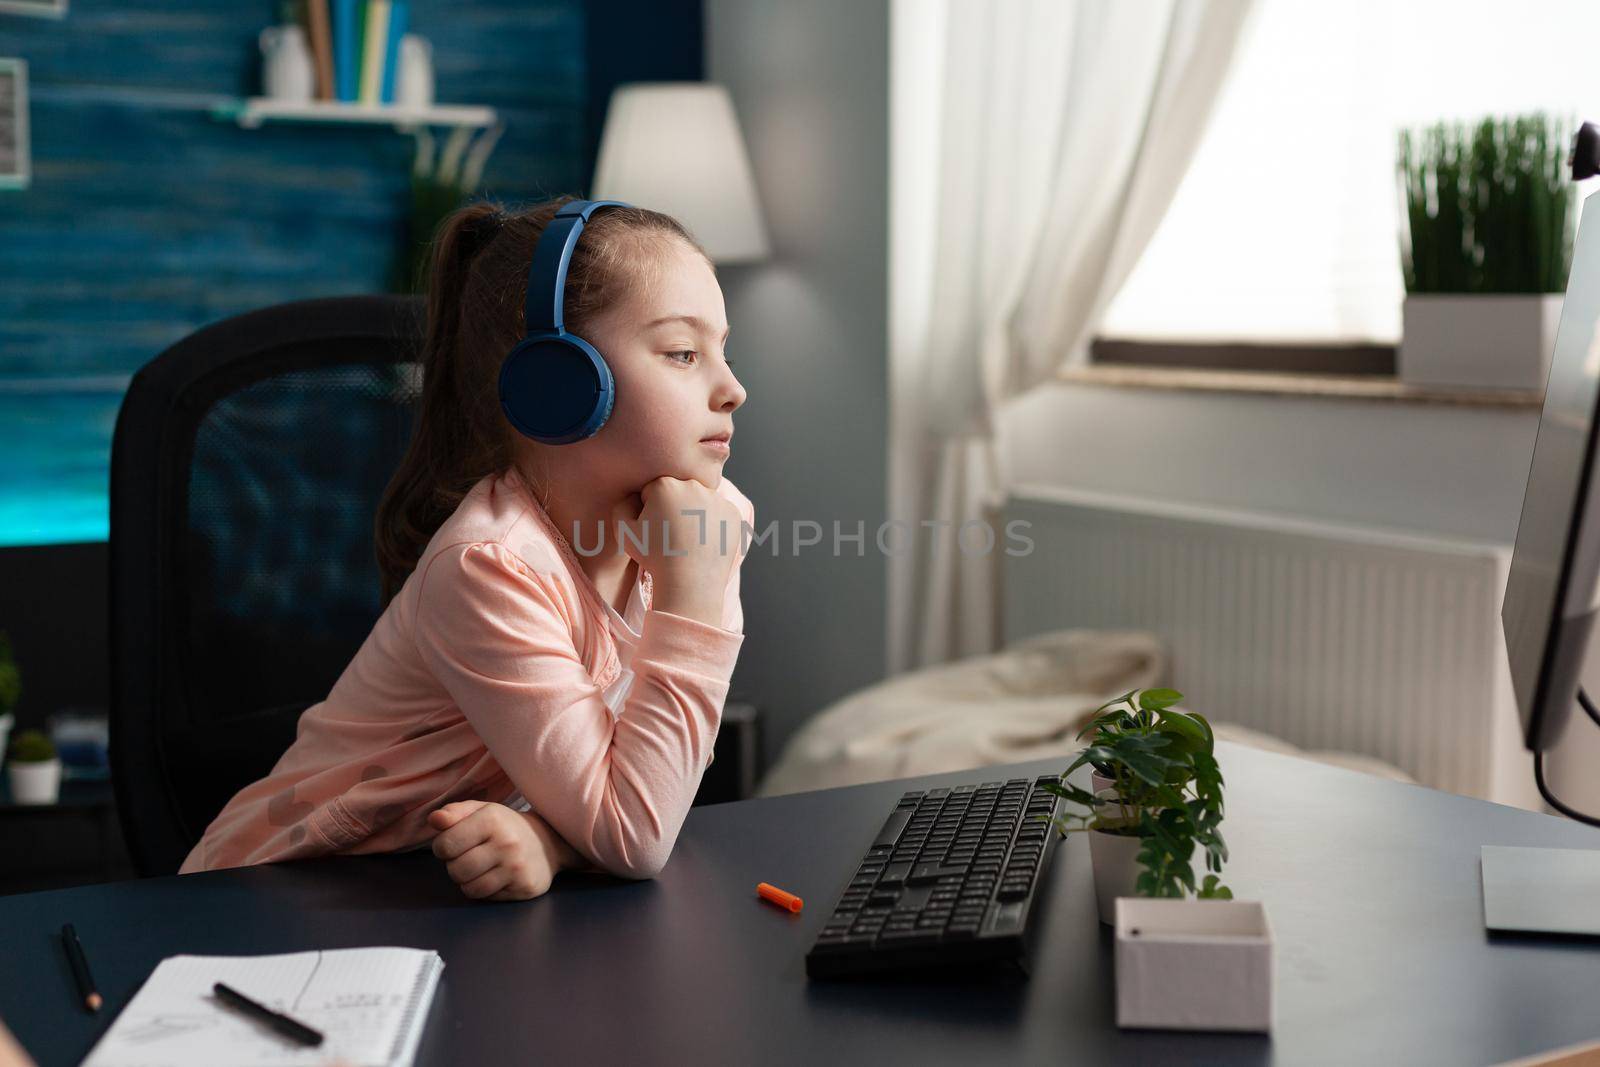 Caucasian student wearing headphones on online class using computer and internet connection at home desk. Smart little child attending elementary school lesson looking at monitor learning